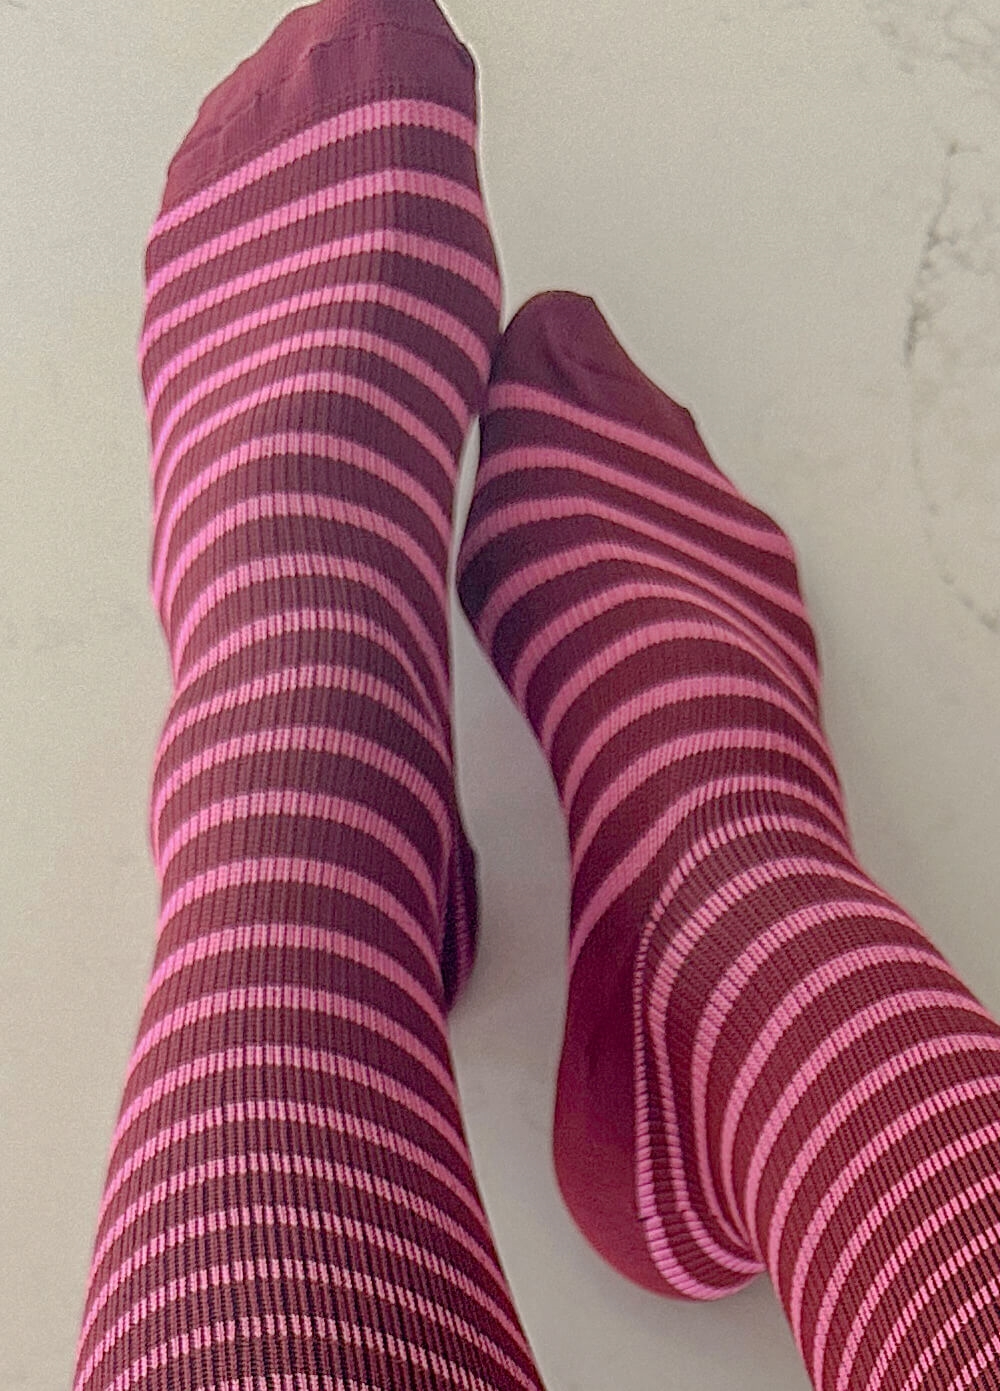 Mama Sox - Excite Maternity Compression Socks in Pink/Claret Stripe